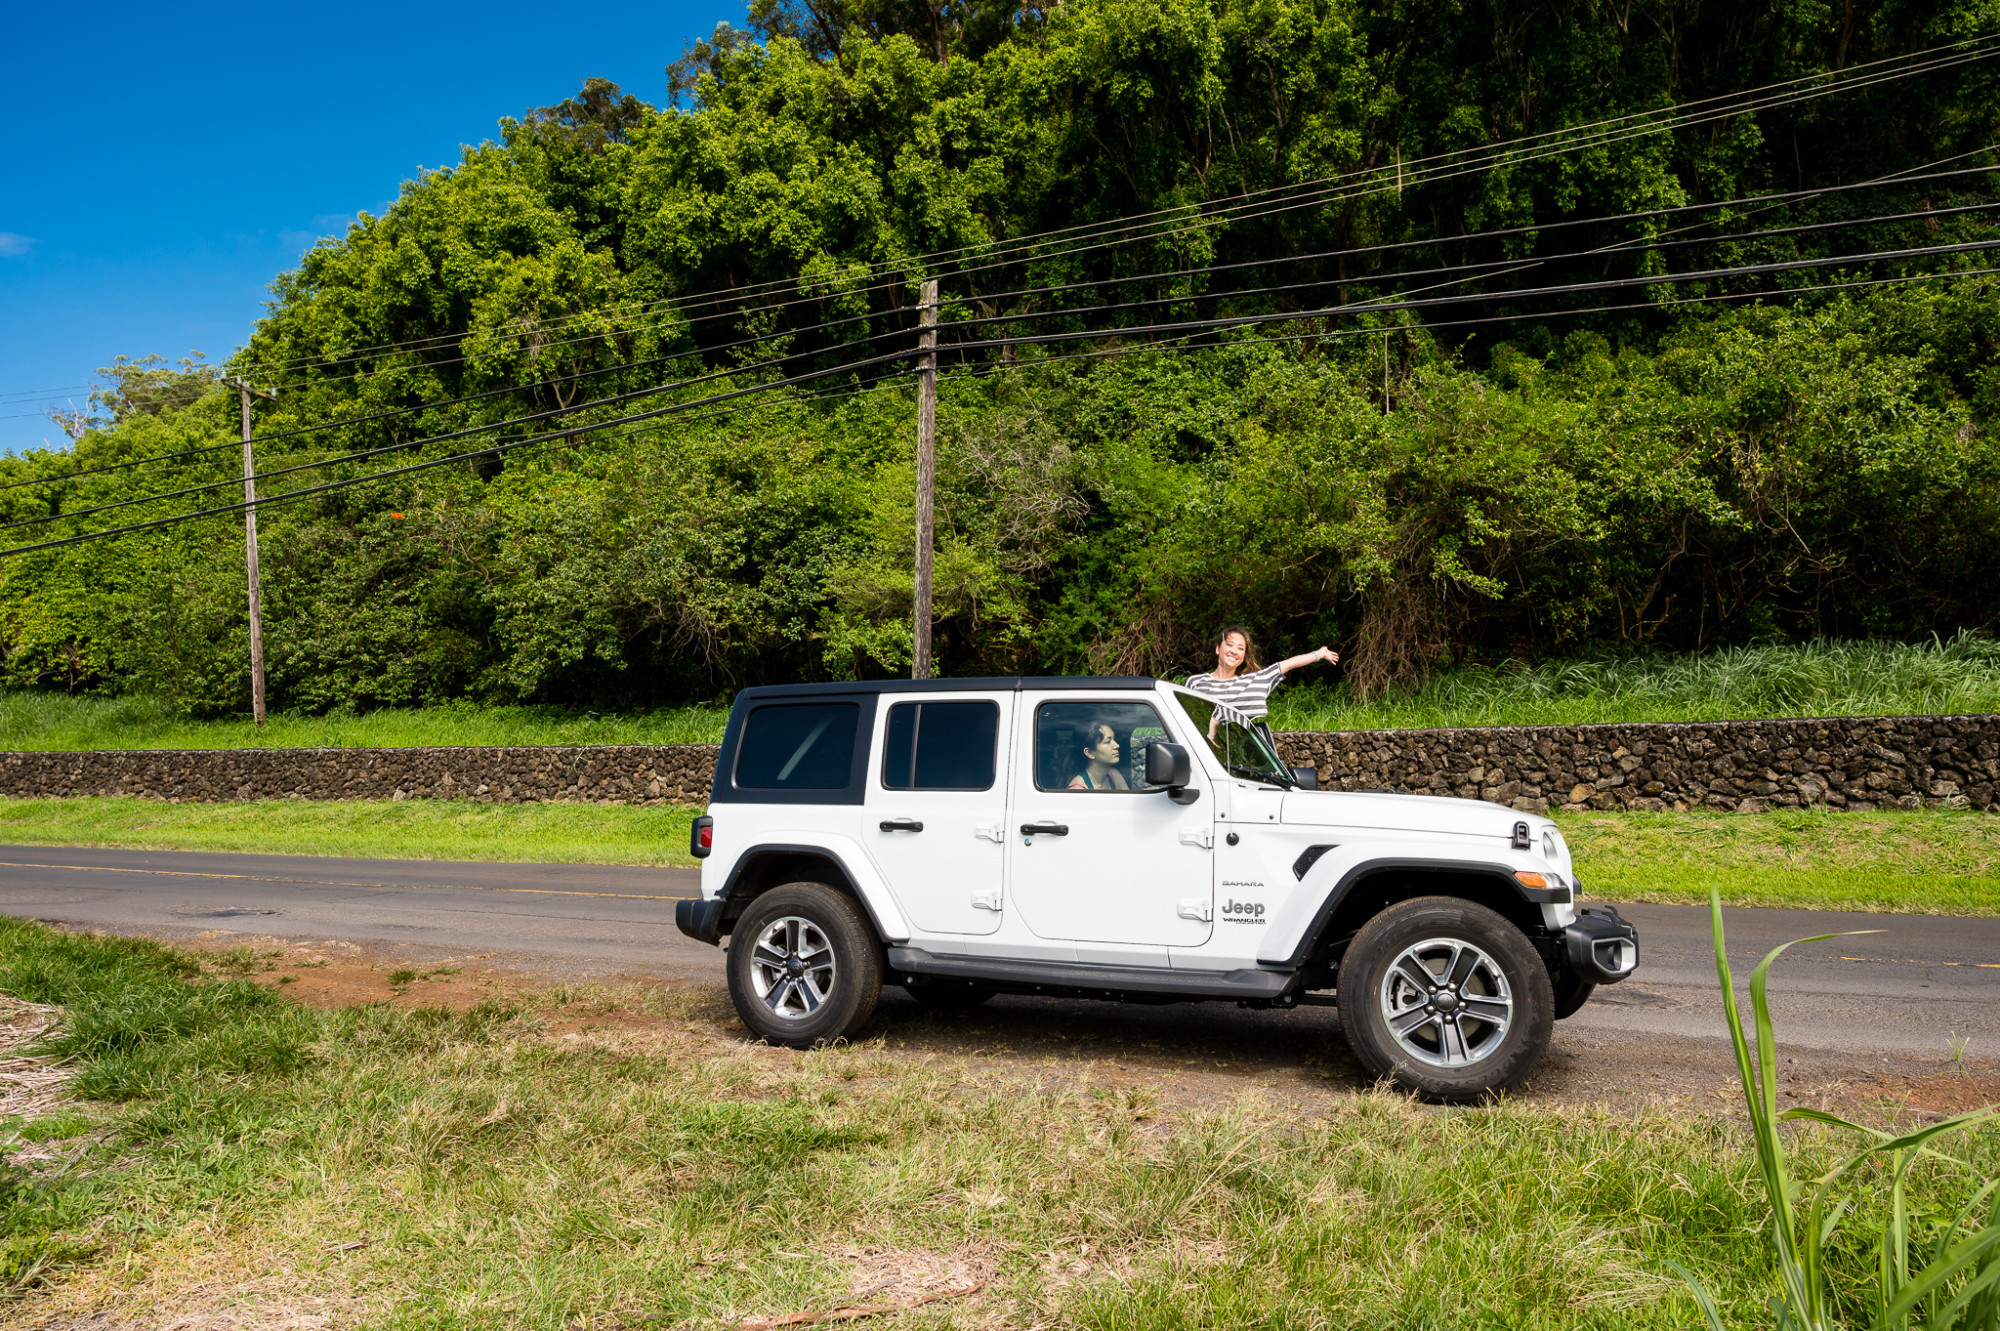 Driving the Road to Hana in a Jeep